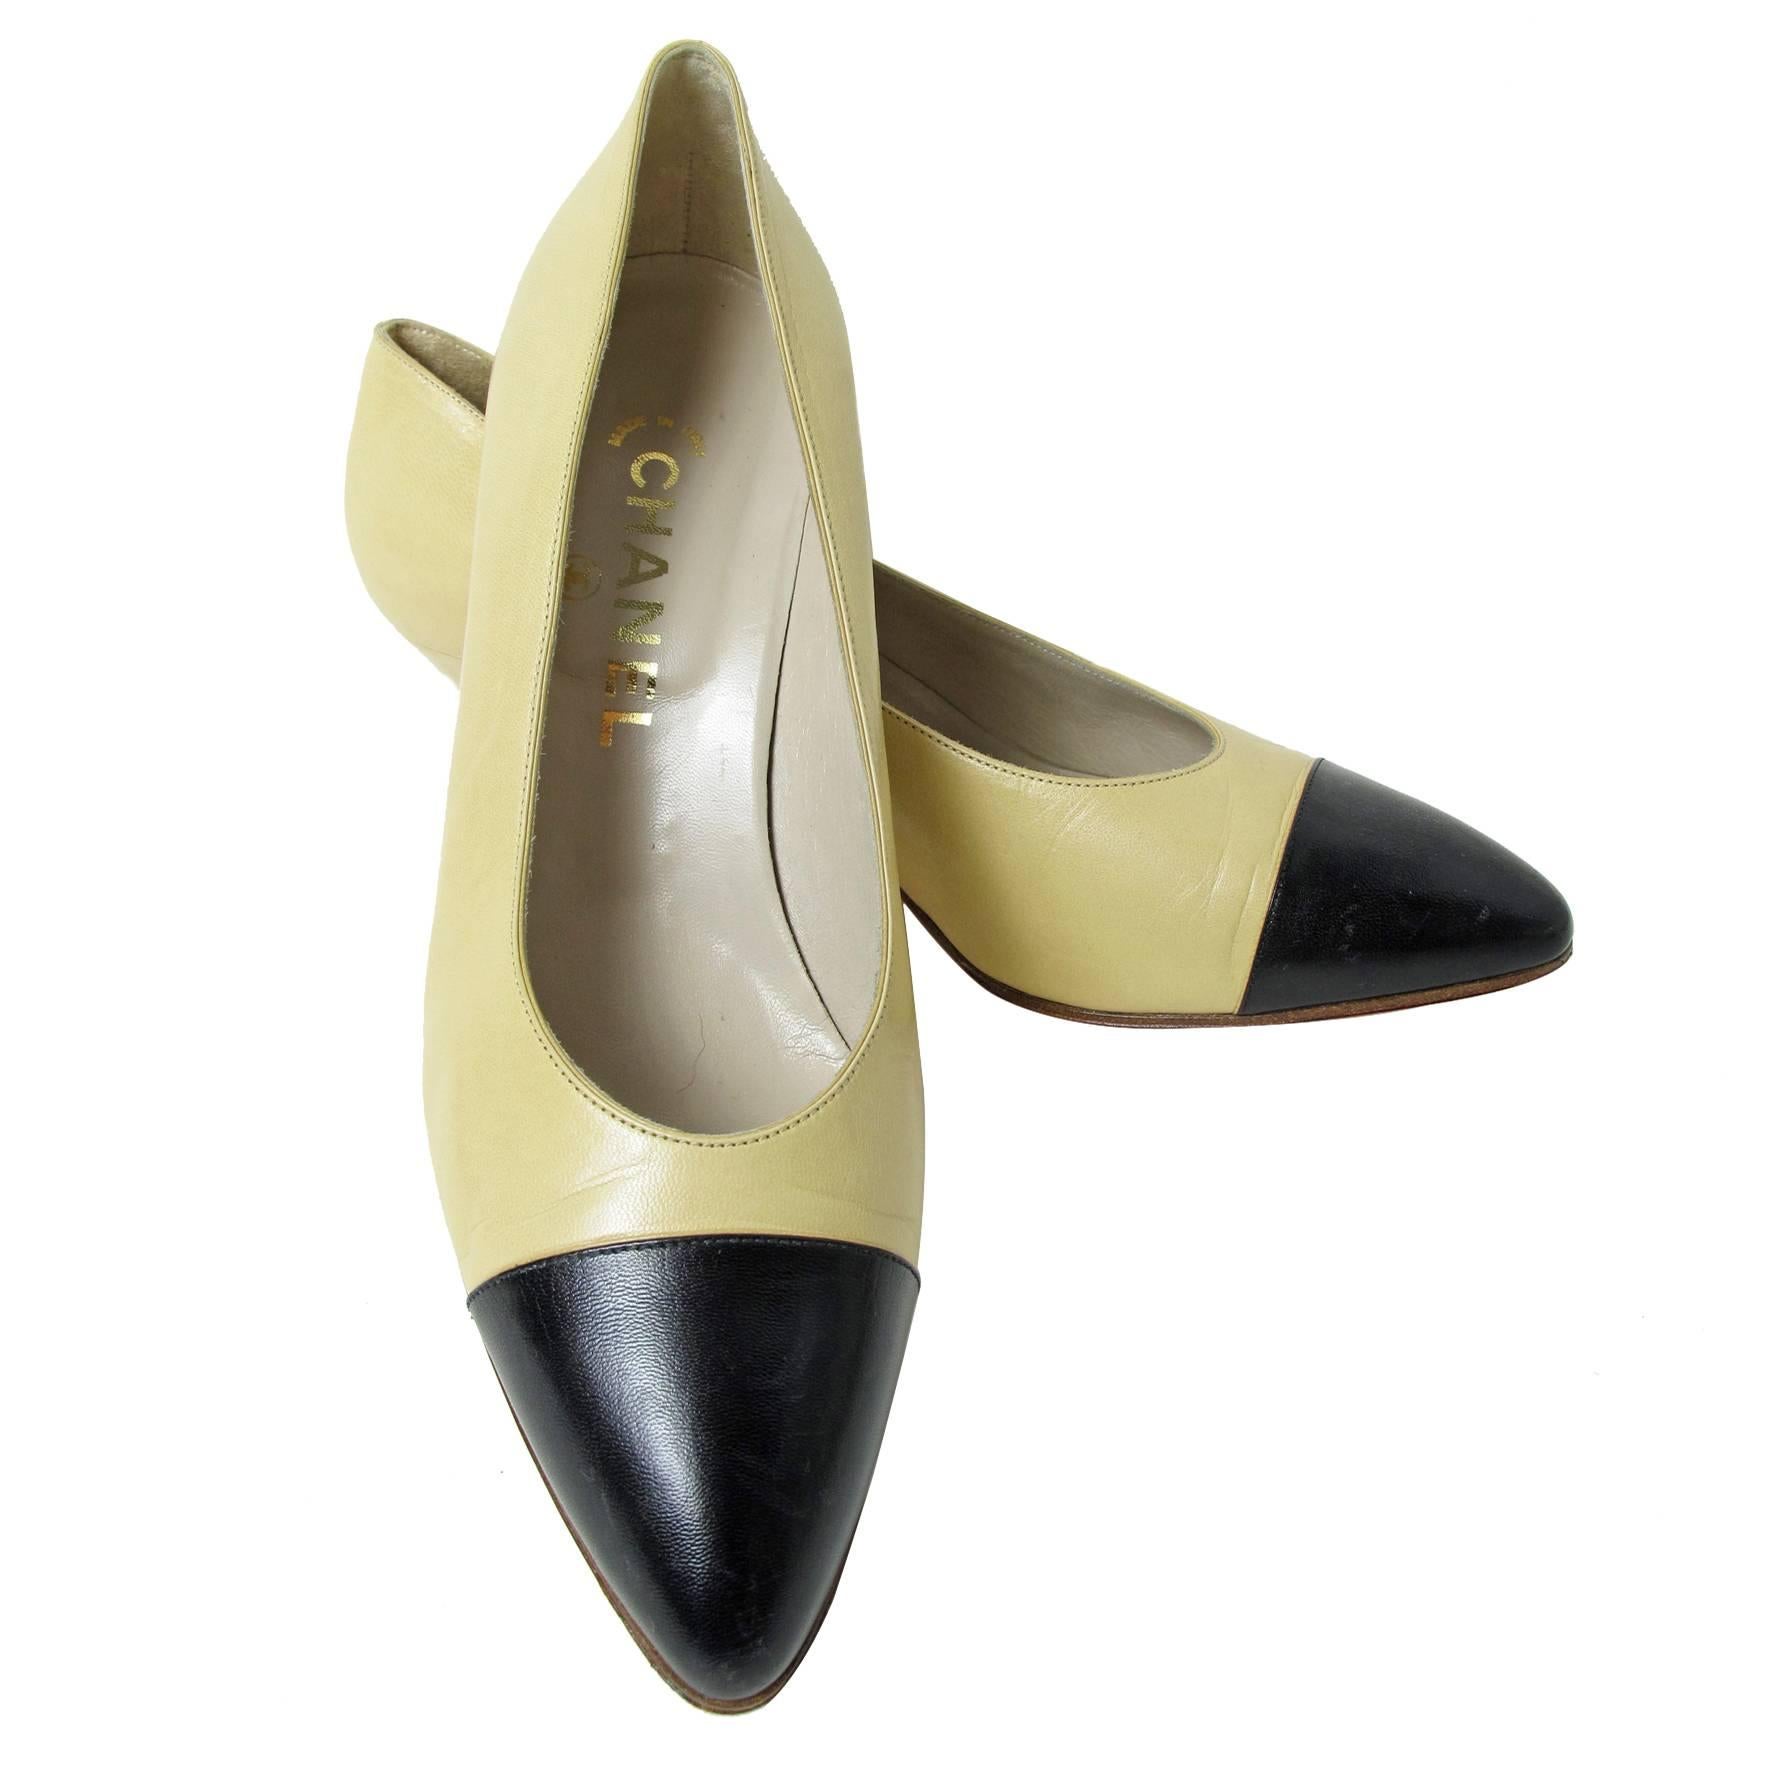 Chanel Beige and Black Leather Heels 37 1/2